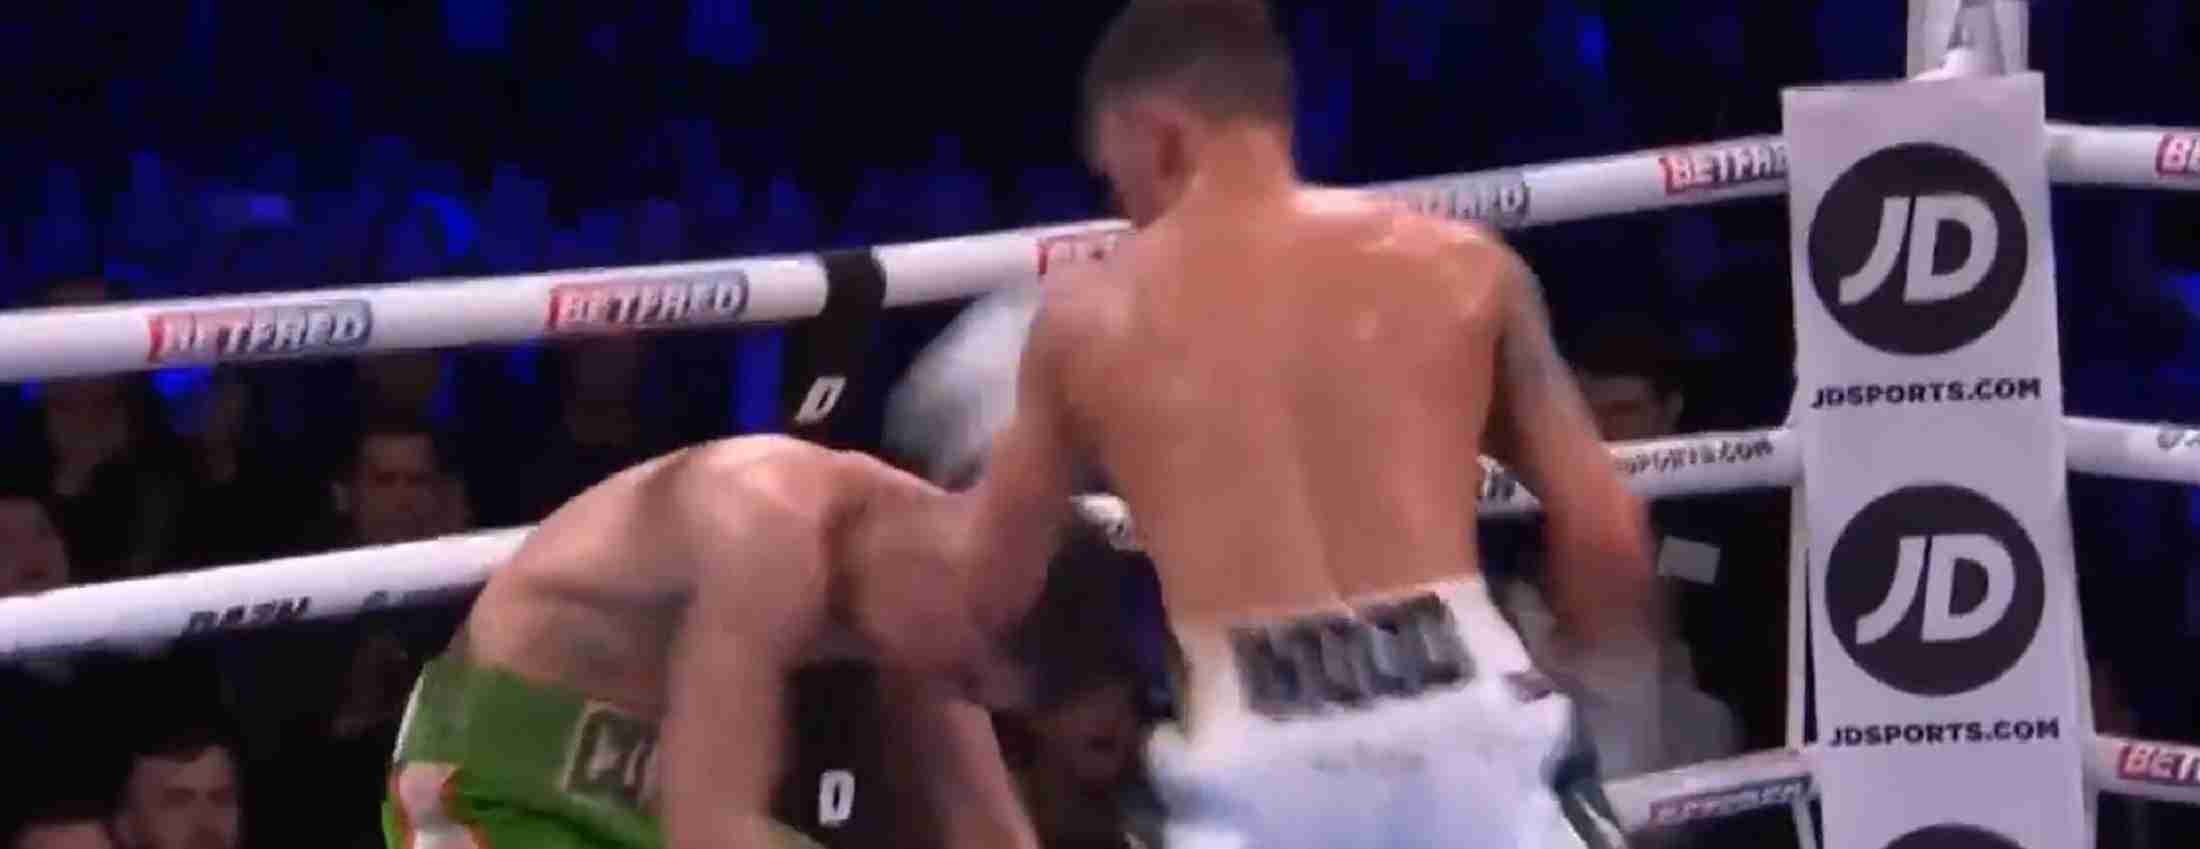 Boxer Brutally Knocked Out On Feet and Then Through Ropes